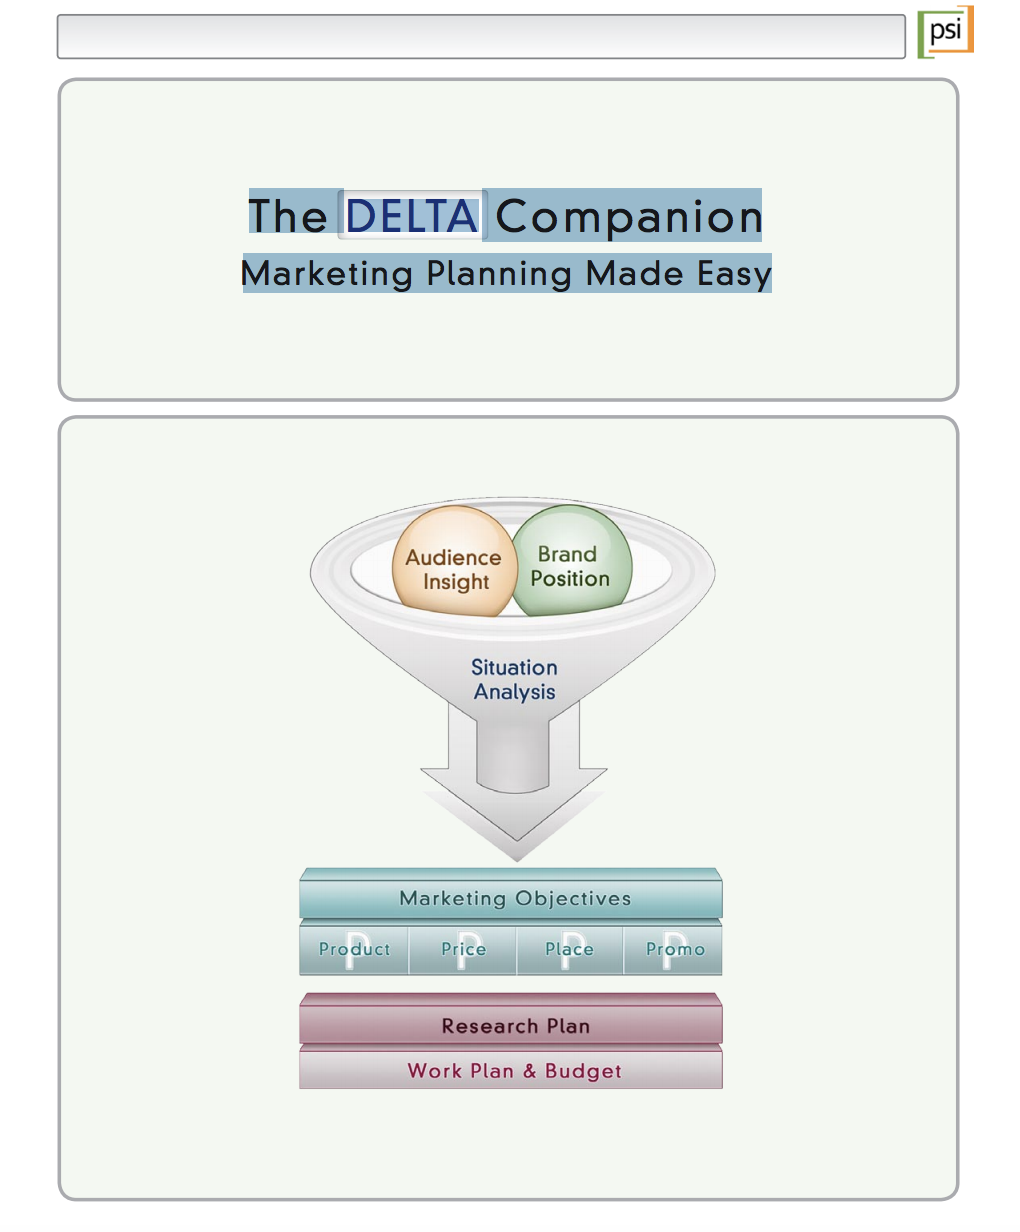 The DELTA Companion Marketing Planning Made Easy